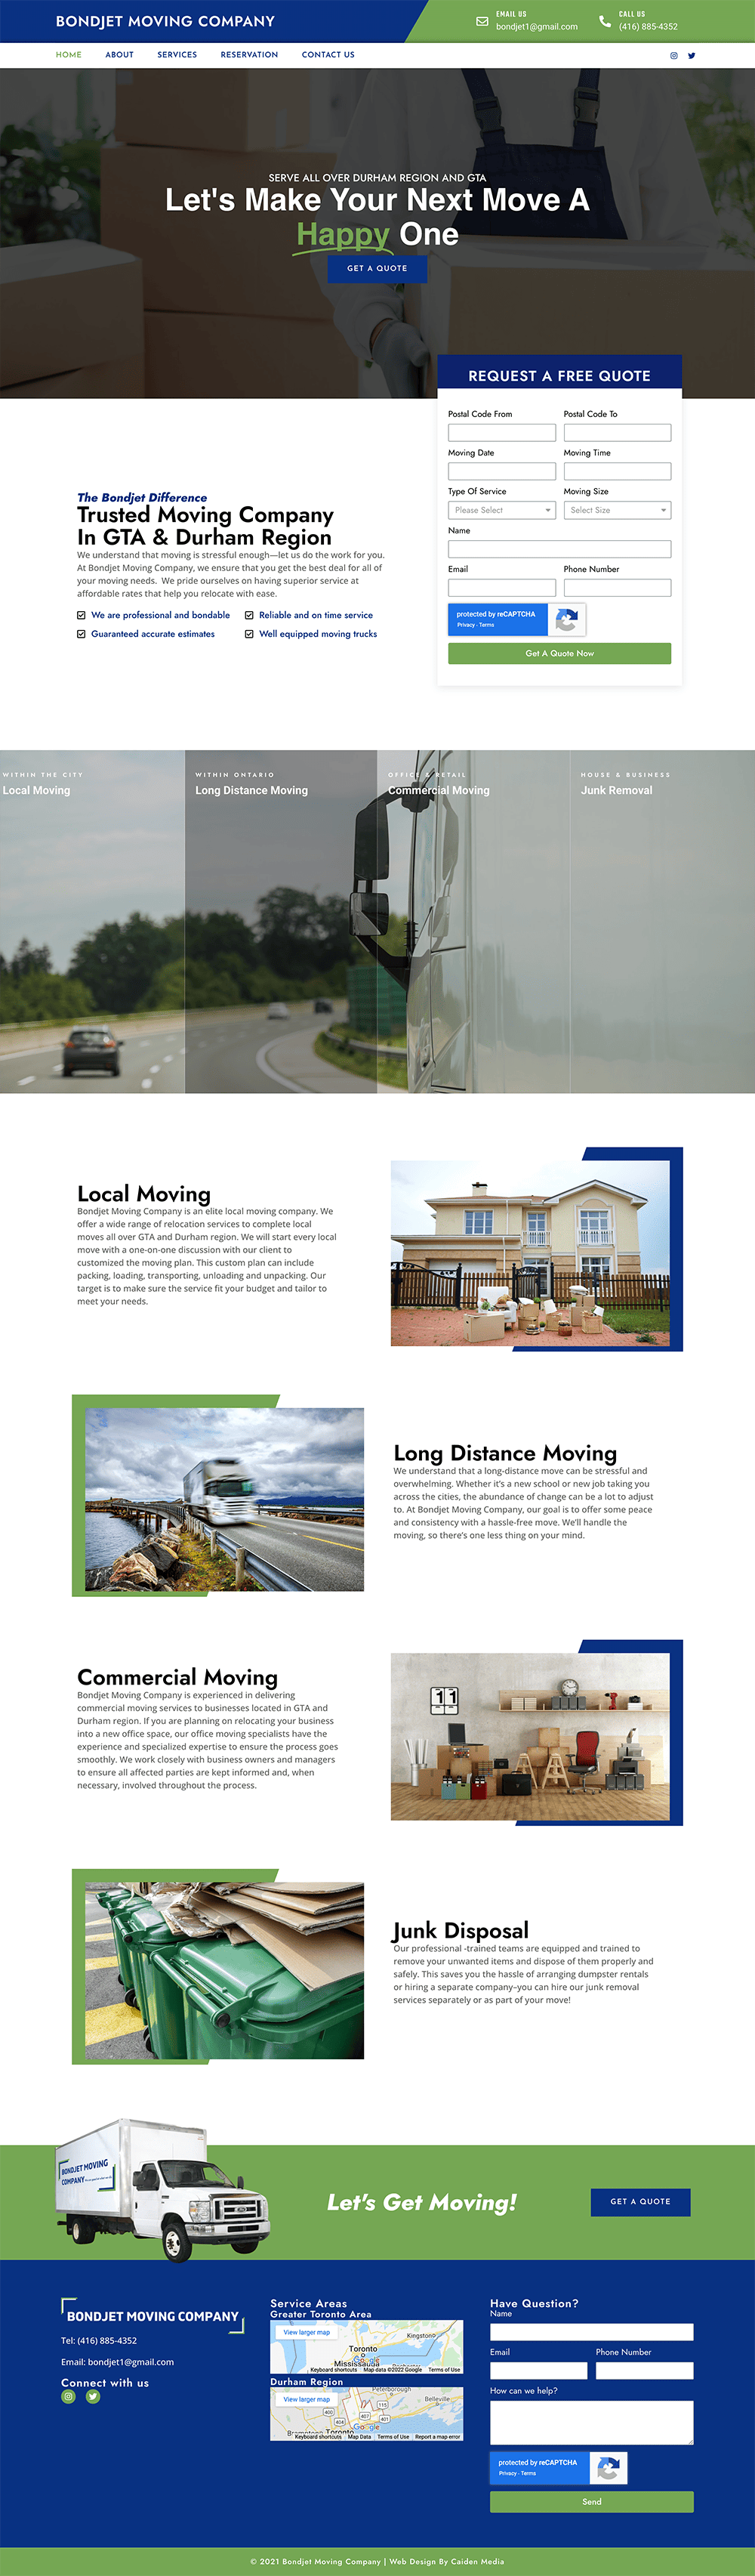 Web Design For Moving Company